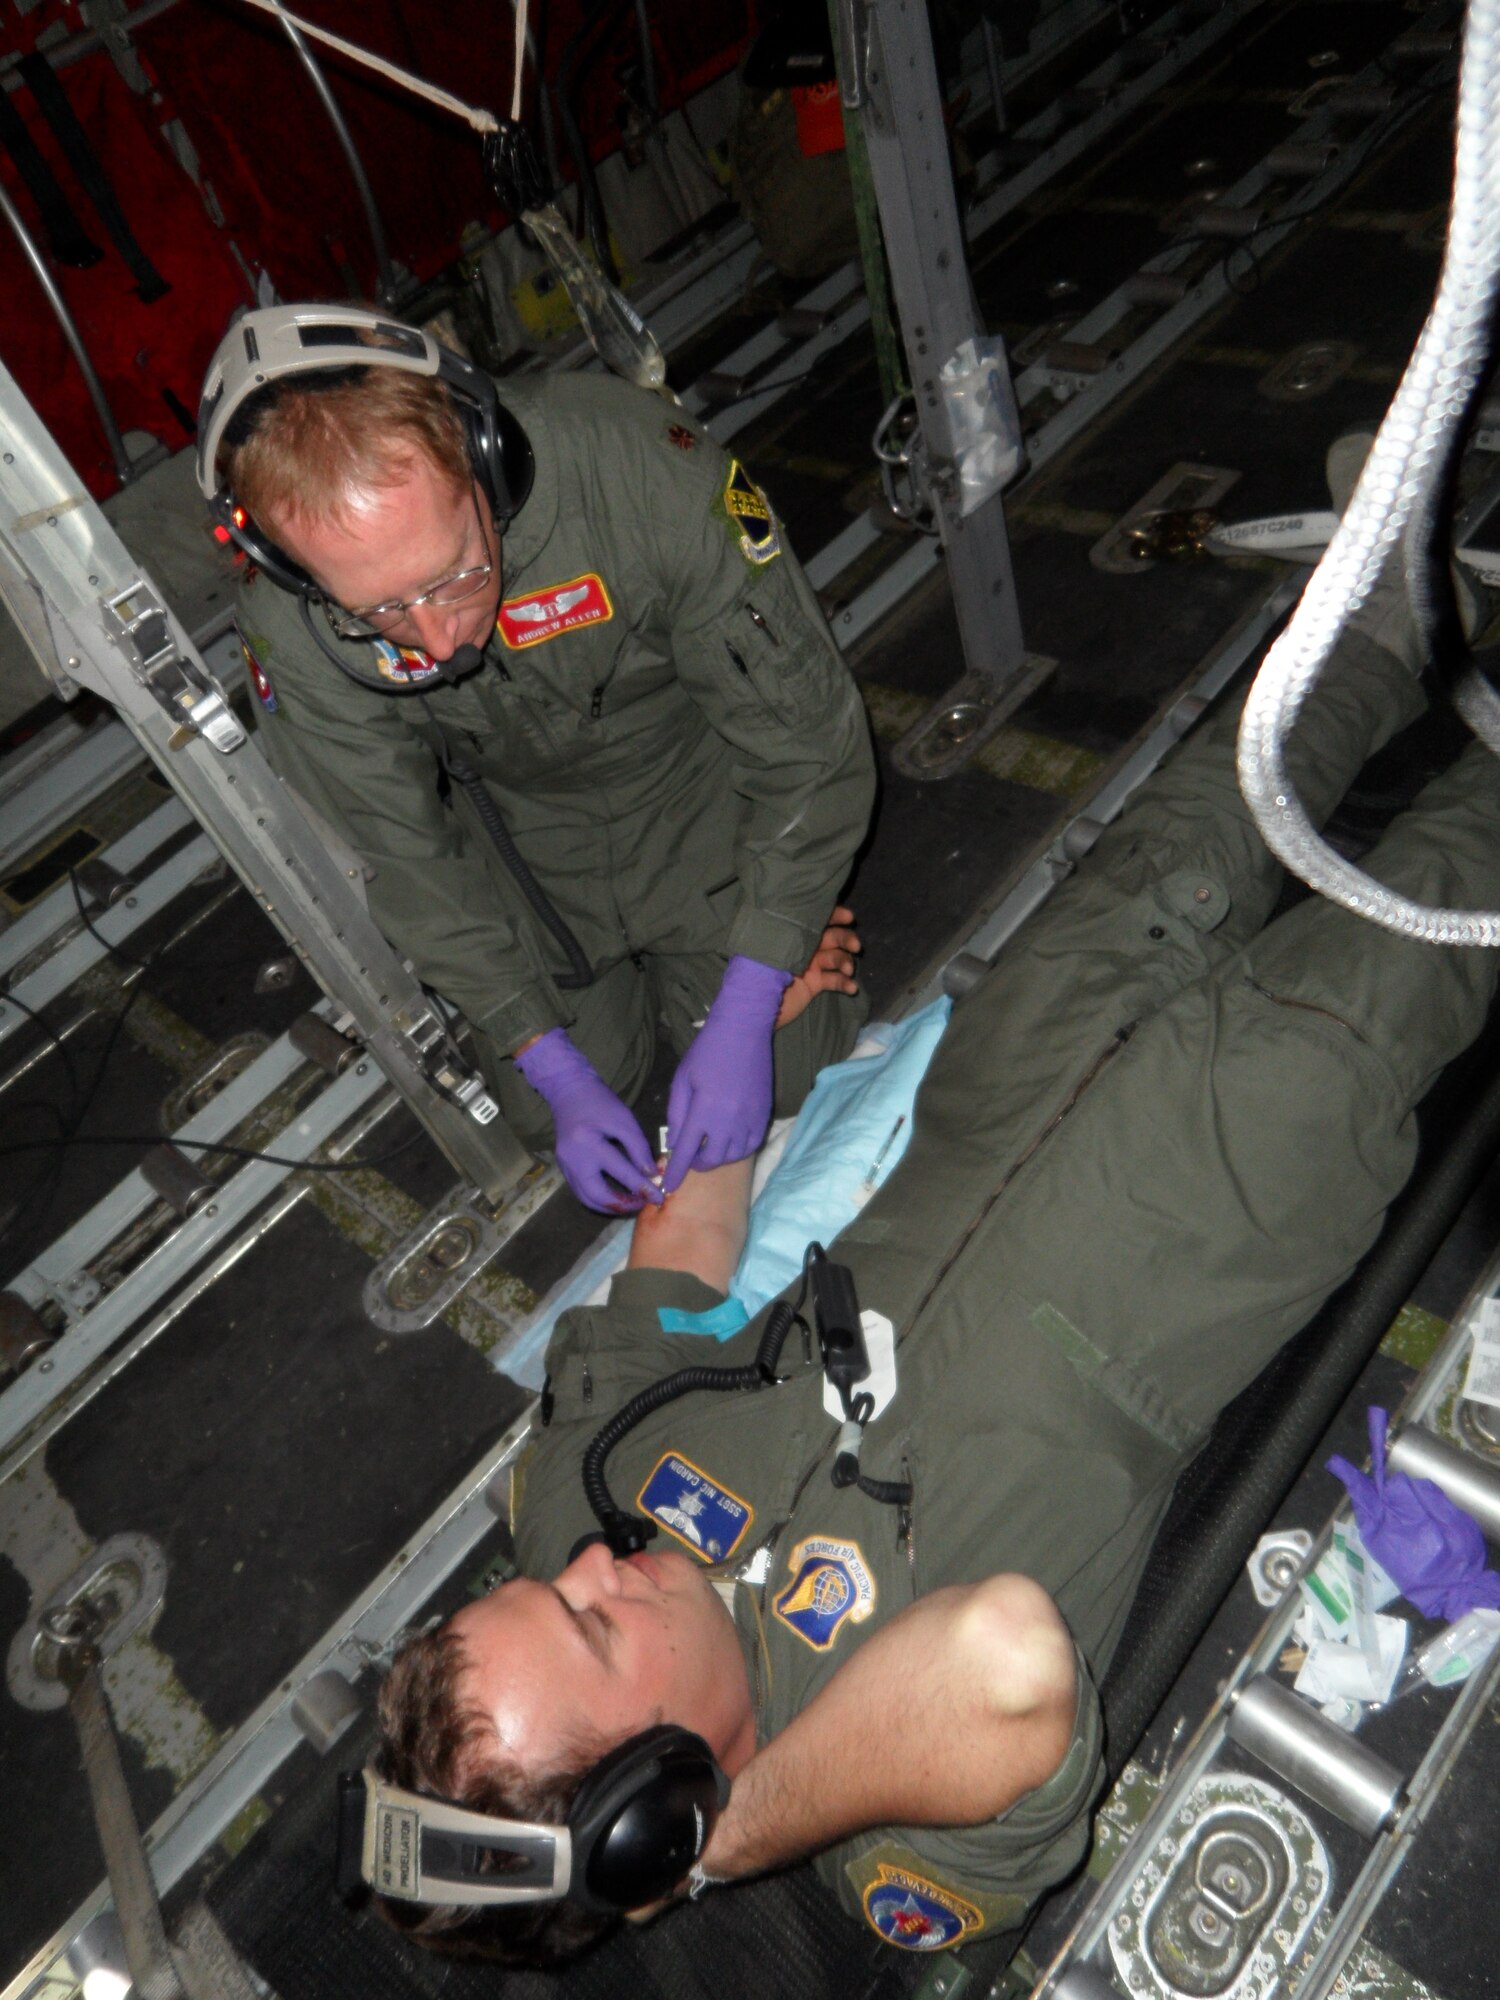 U.S. Air Force Maj. Andrew Allen, 7th Aerospace Medicine Squadron, inserts an intravenous line into Staff Sgt. Nicholas Cardin, 18th Air Evacuation Squadron, during an during in-flight resuscitation training Jan. 10, 2014, at Ross Island, Antarctica. Allen not only provided medical care for aviators, but had primary medical responsibility for all military personnel on station, which includes members of the U.S. Air Force, U.S. Army, U.S. Navy and U.S. Coast Guard. Additionally, he supported casualty evacuation missions and patient movement across the continent. (Courtesy photo)  